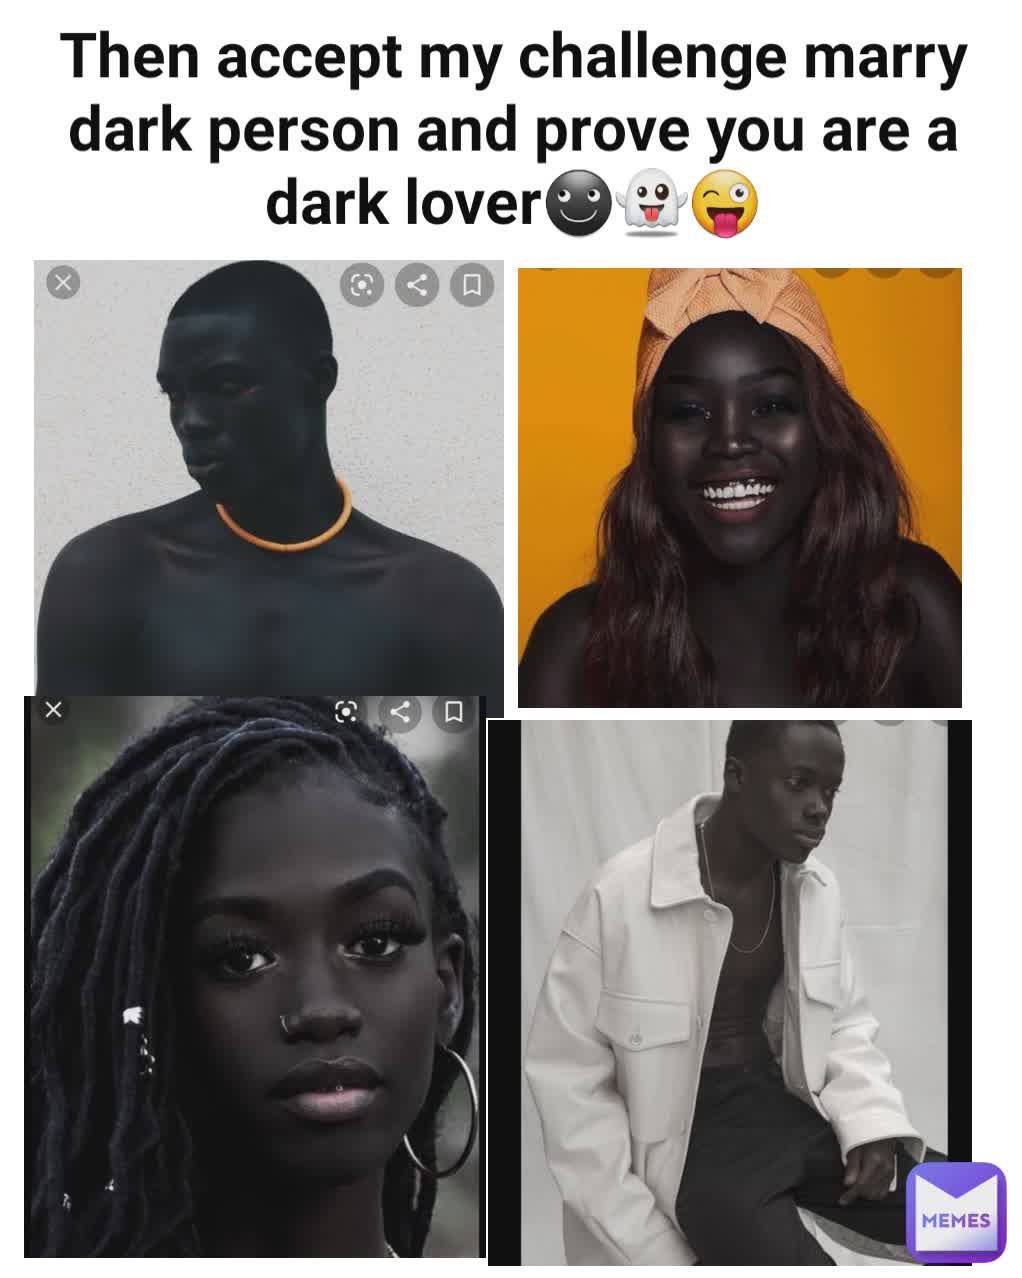 Then accept my challenge marry dark person and prove you are a dark lover☻👻😜